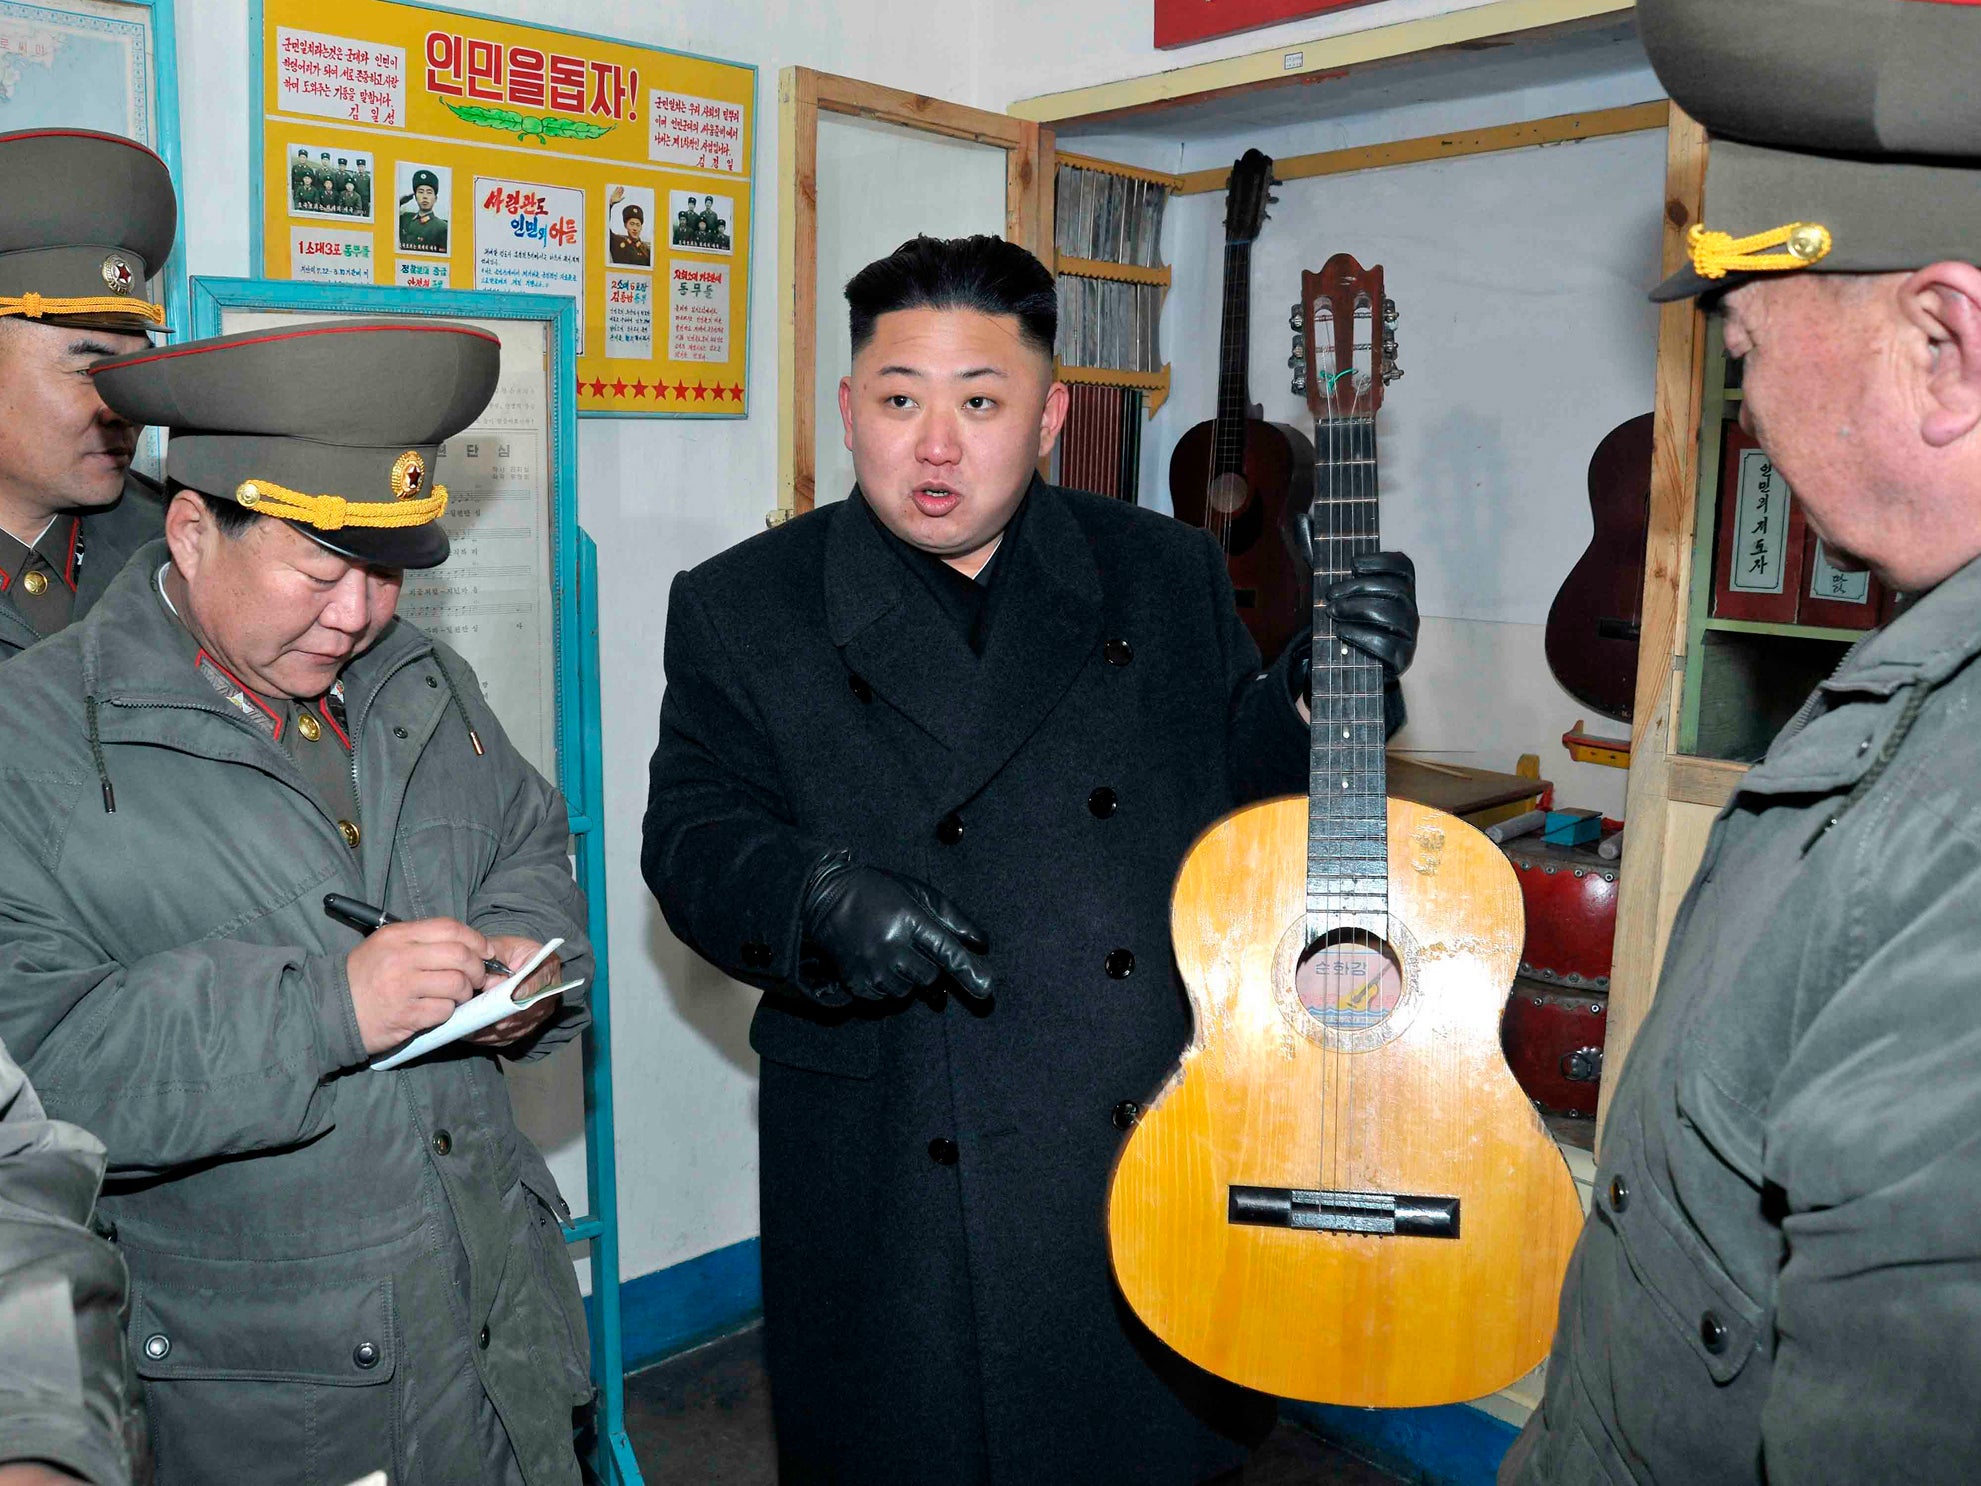 North Korean leader Kim Jong-Un holds a guitar during a visit to a military unit on the Wolnae Islet Defence Detachment in 2013